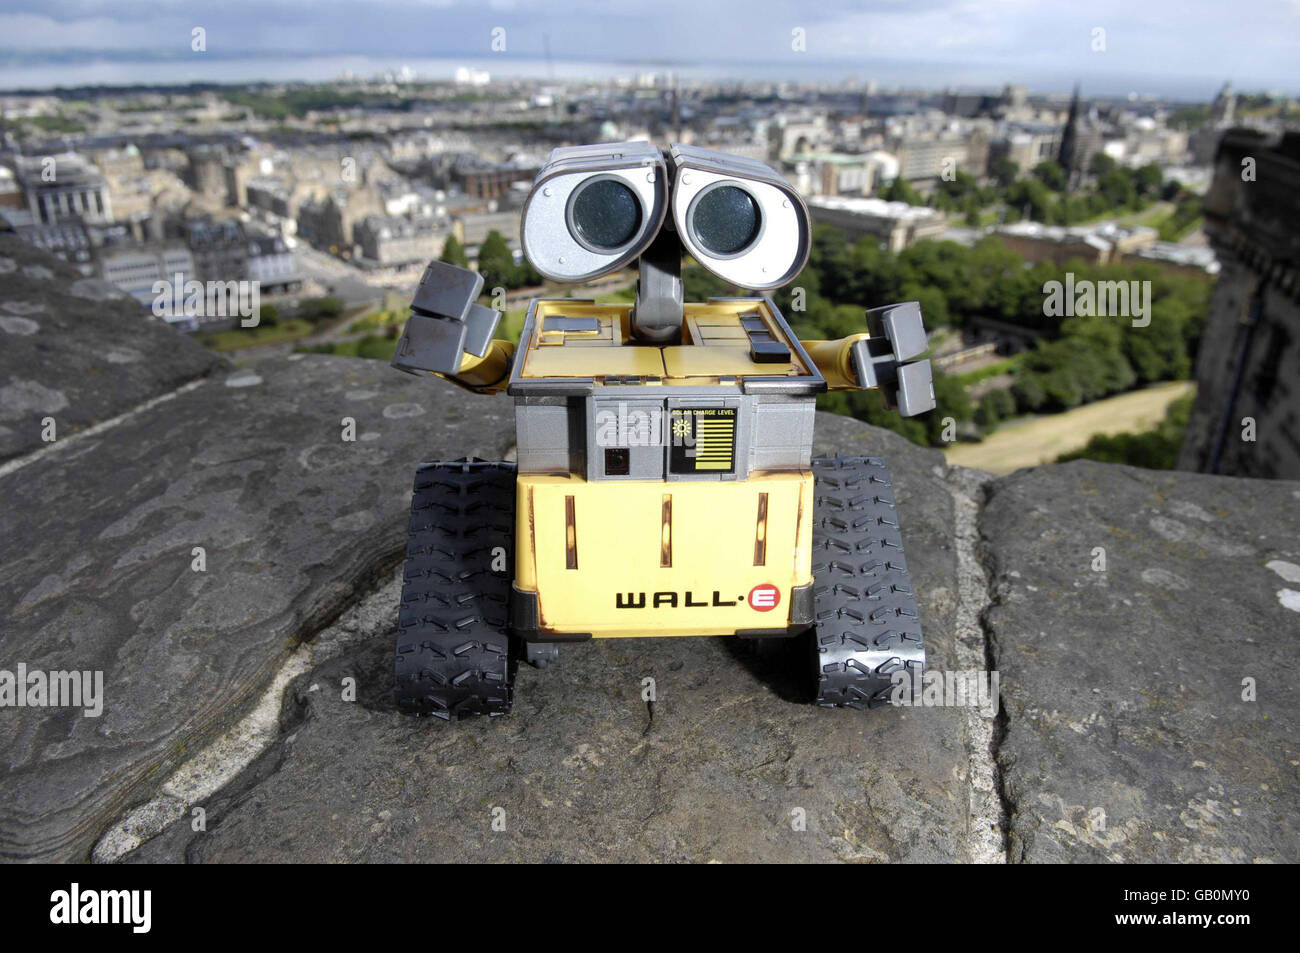 A Robot Wall E High Resolution Stock Photography And Images Alamy